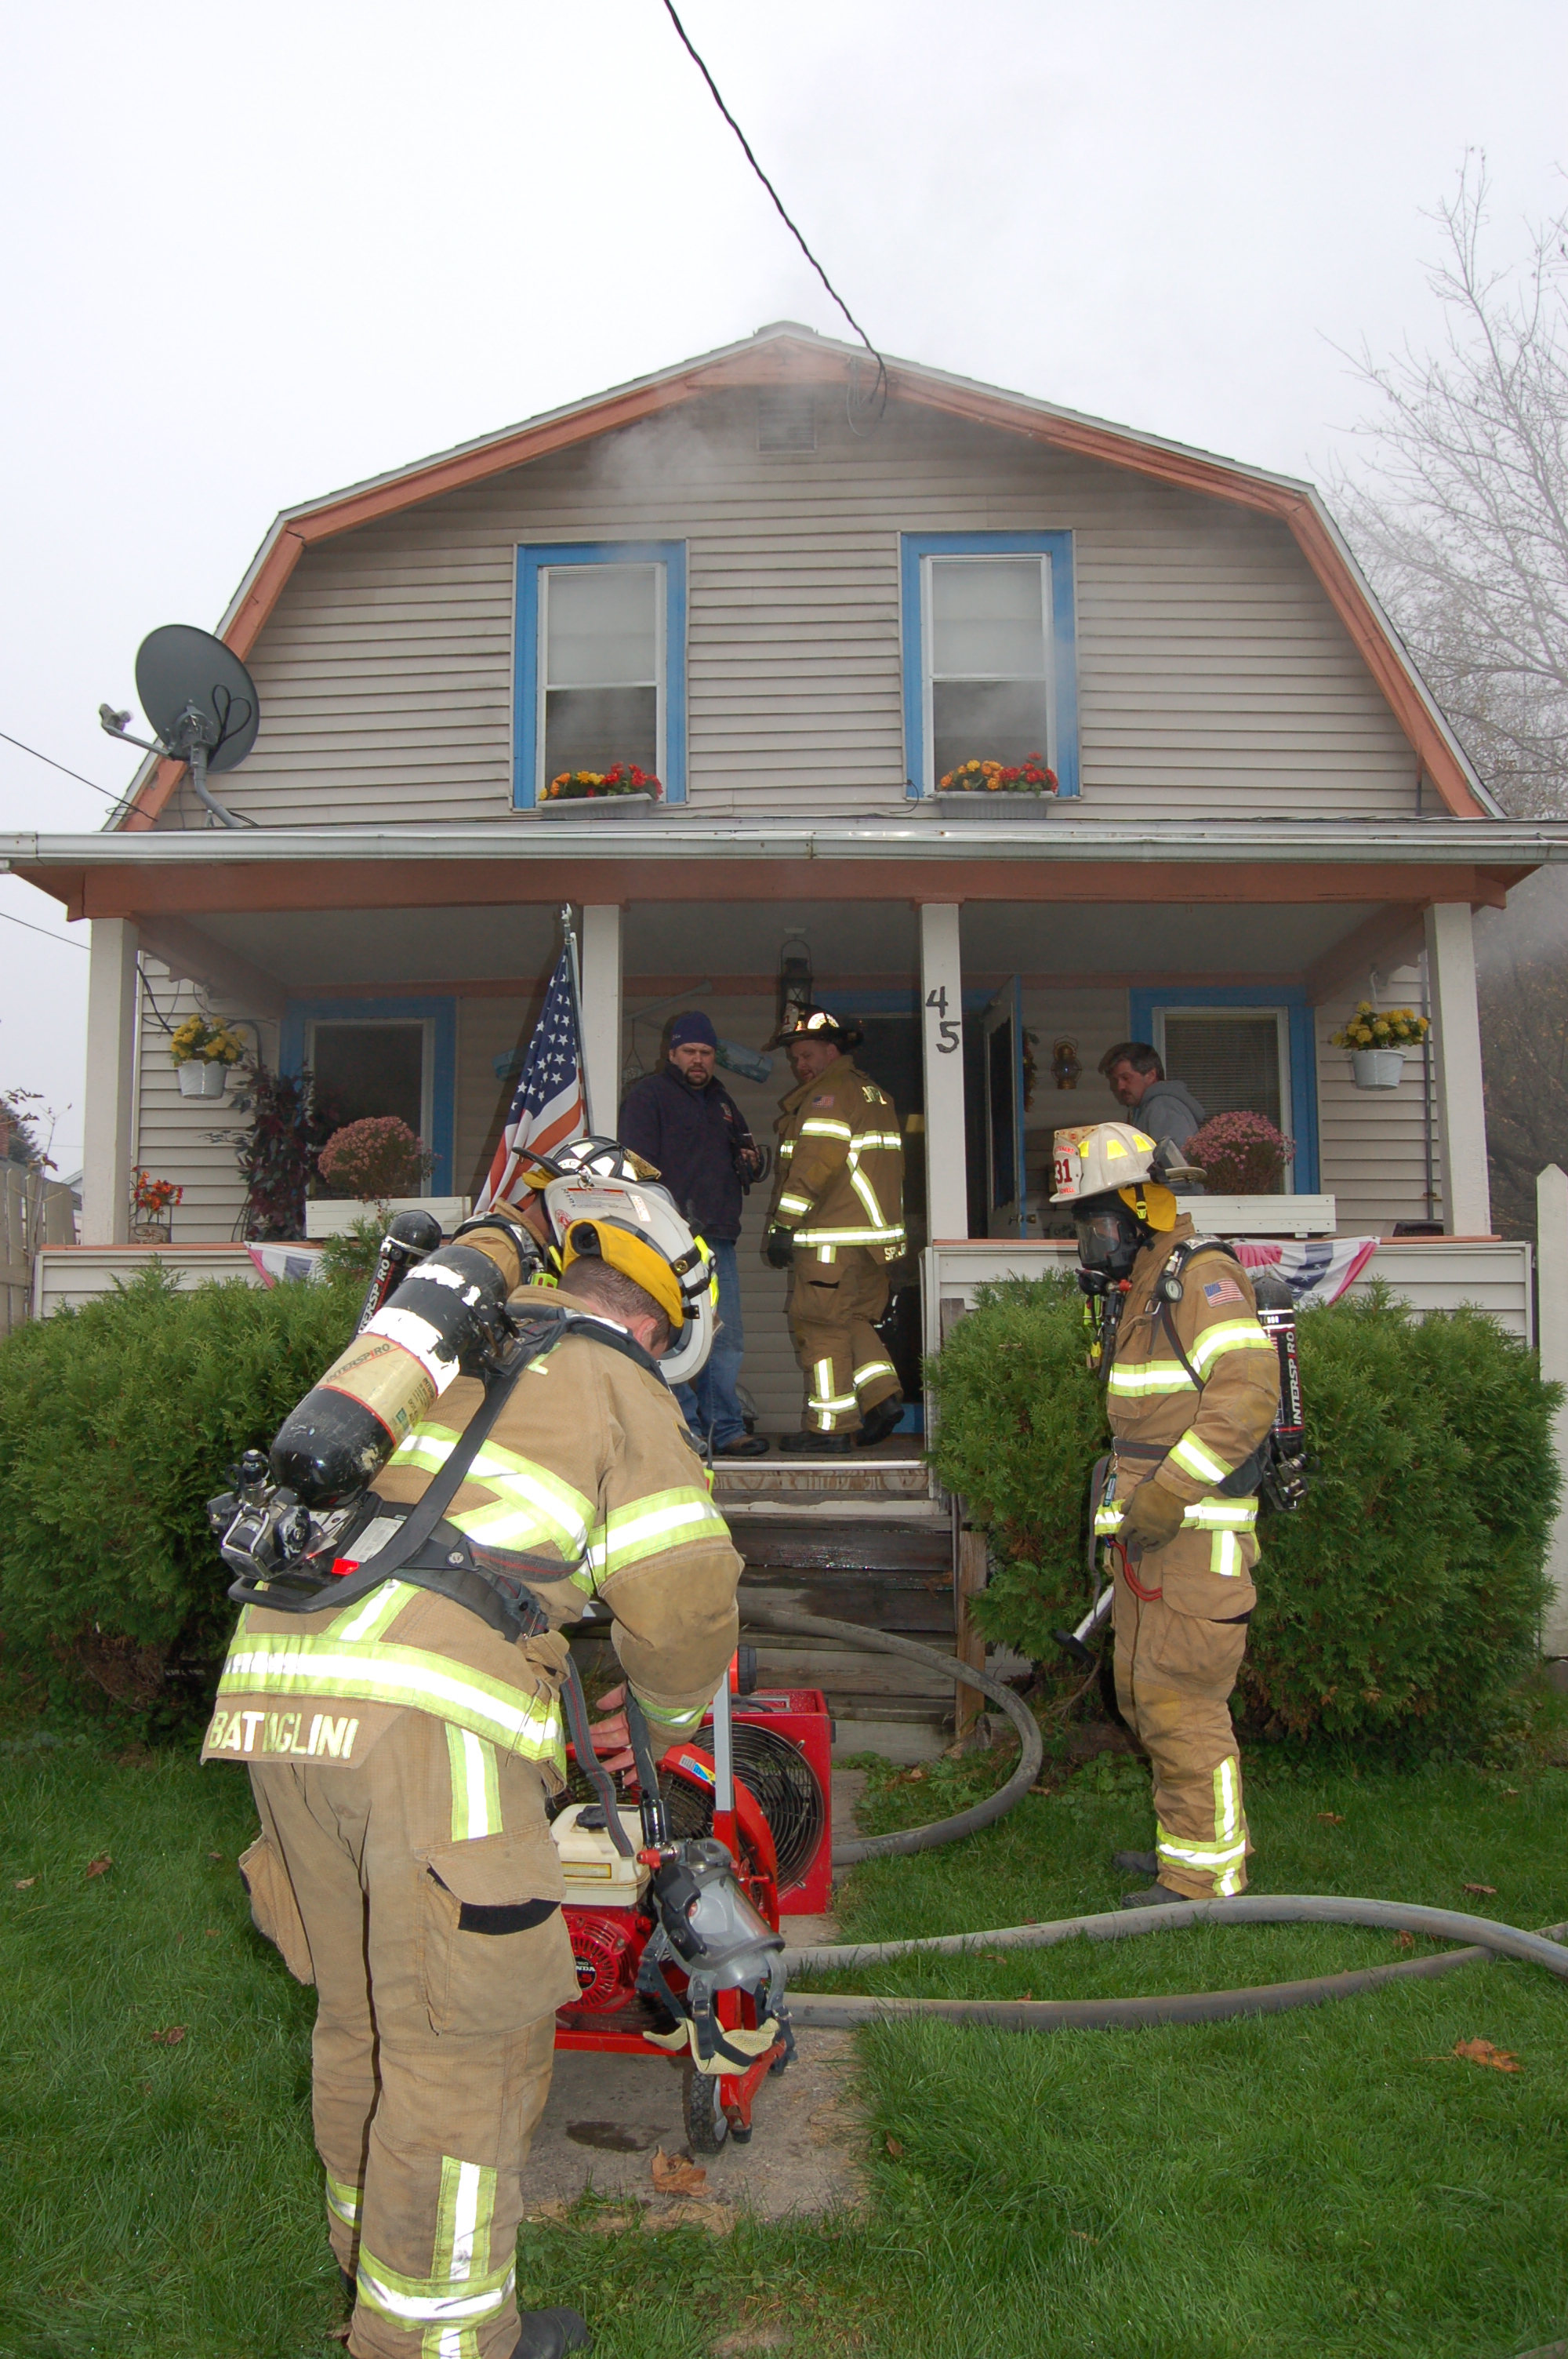 11-29-11  Response - Stove Fire 45 N Brookside